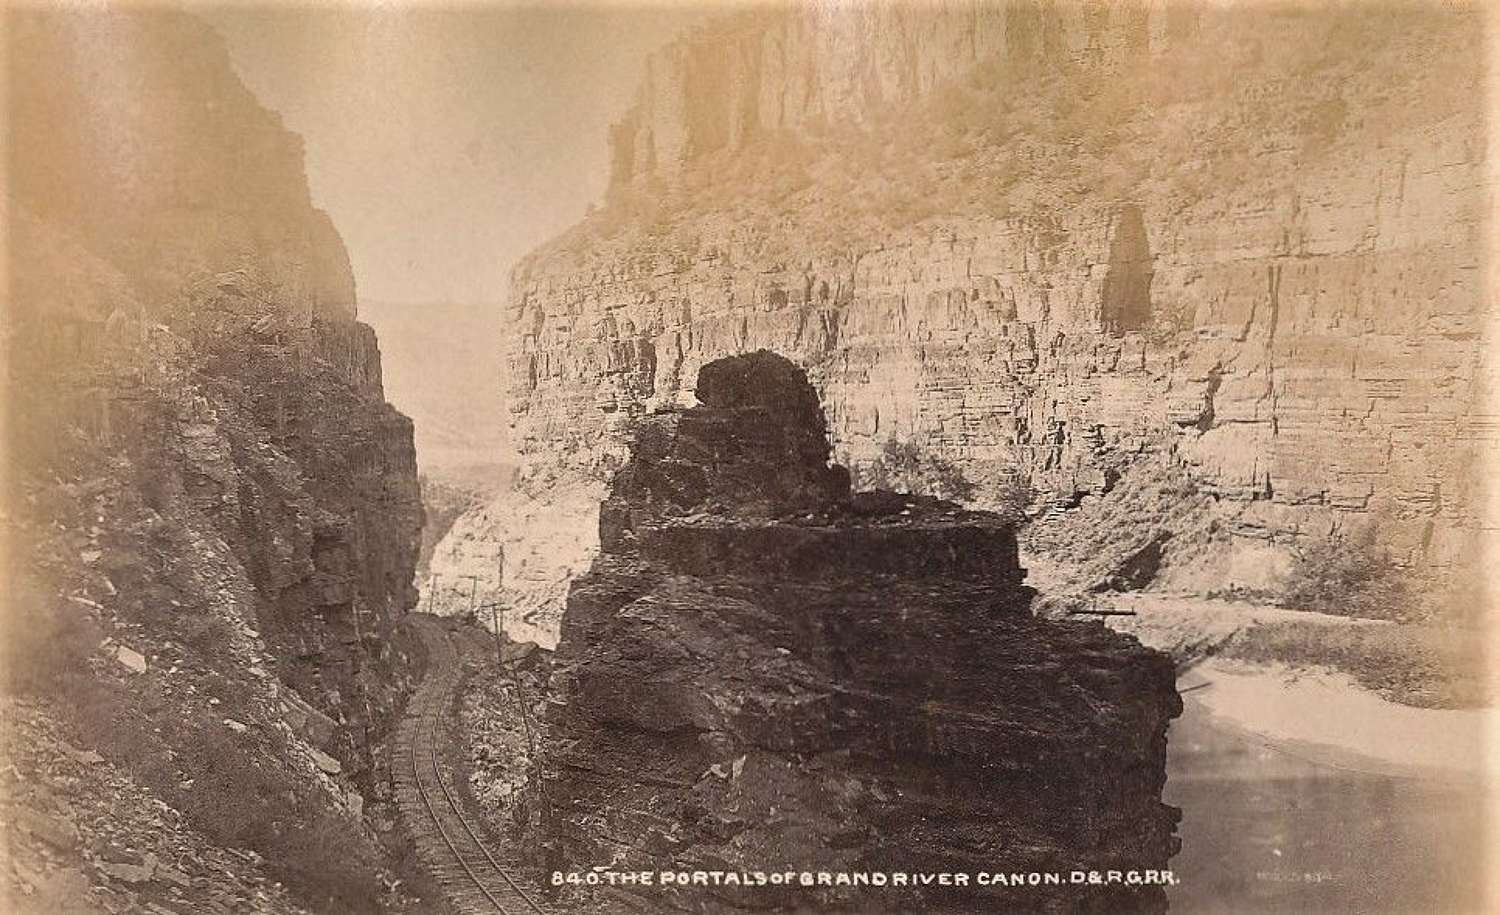 The Rocky Mountains Grand River Canon U.S.A  By D. & R.G.R.R.